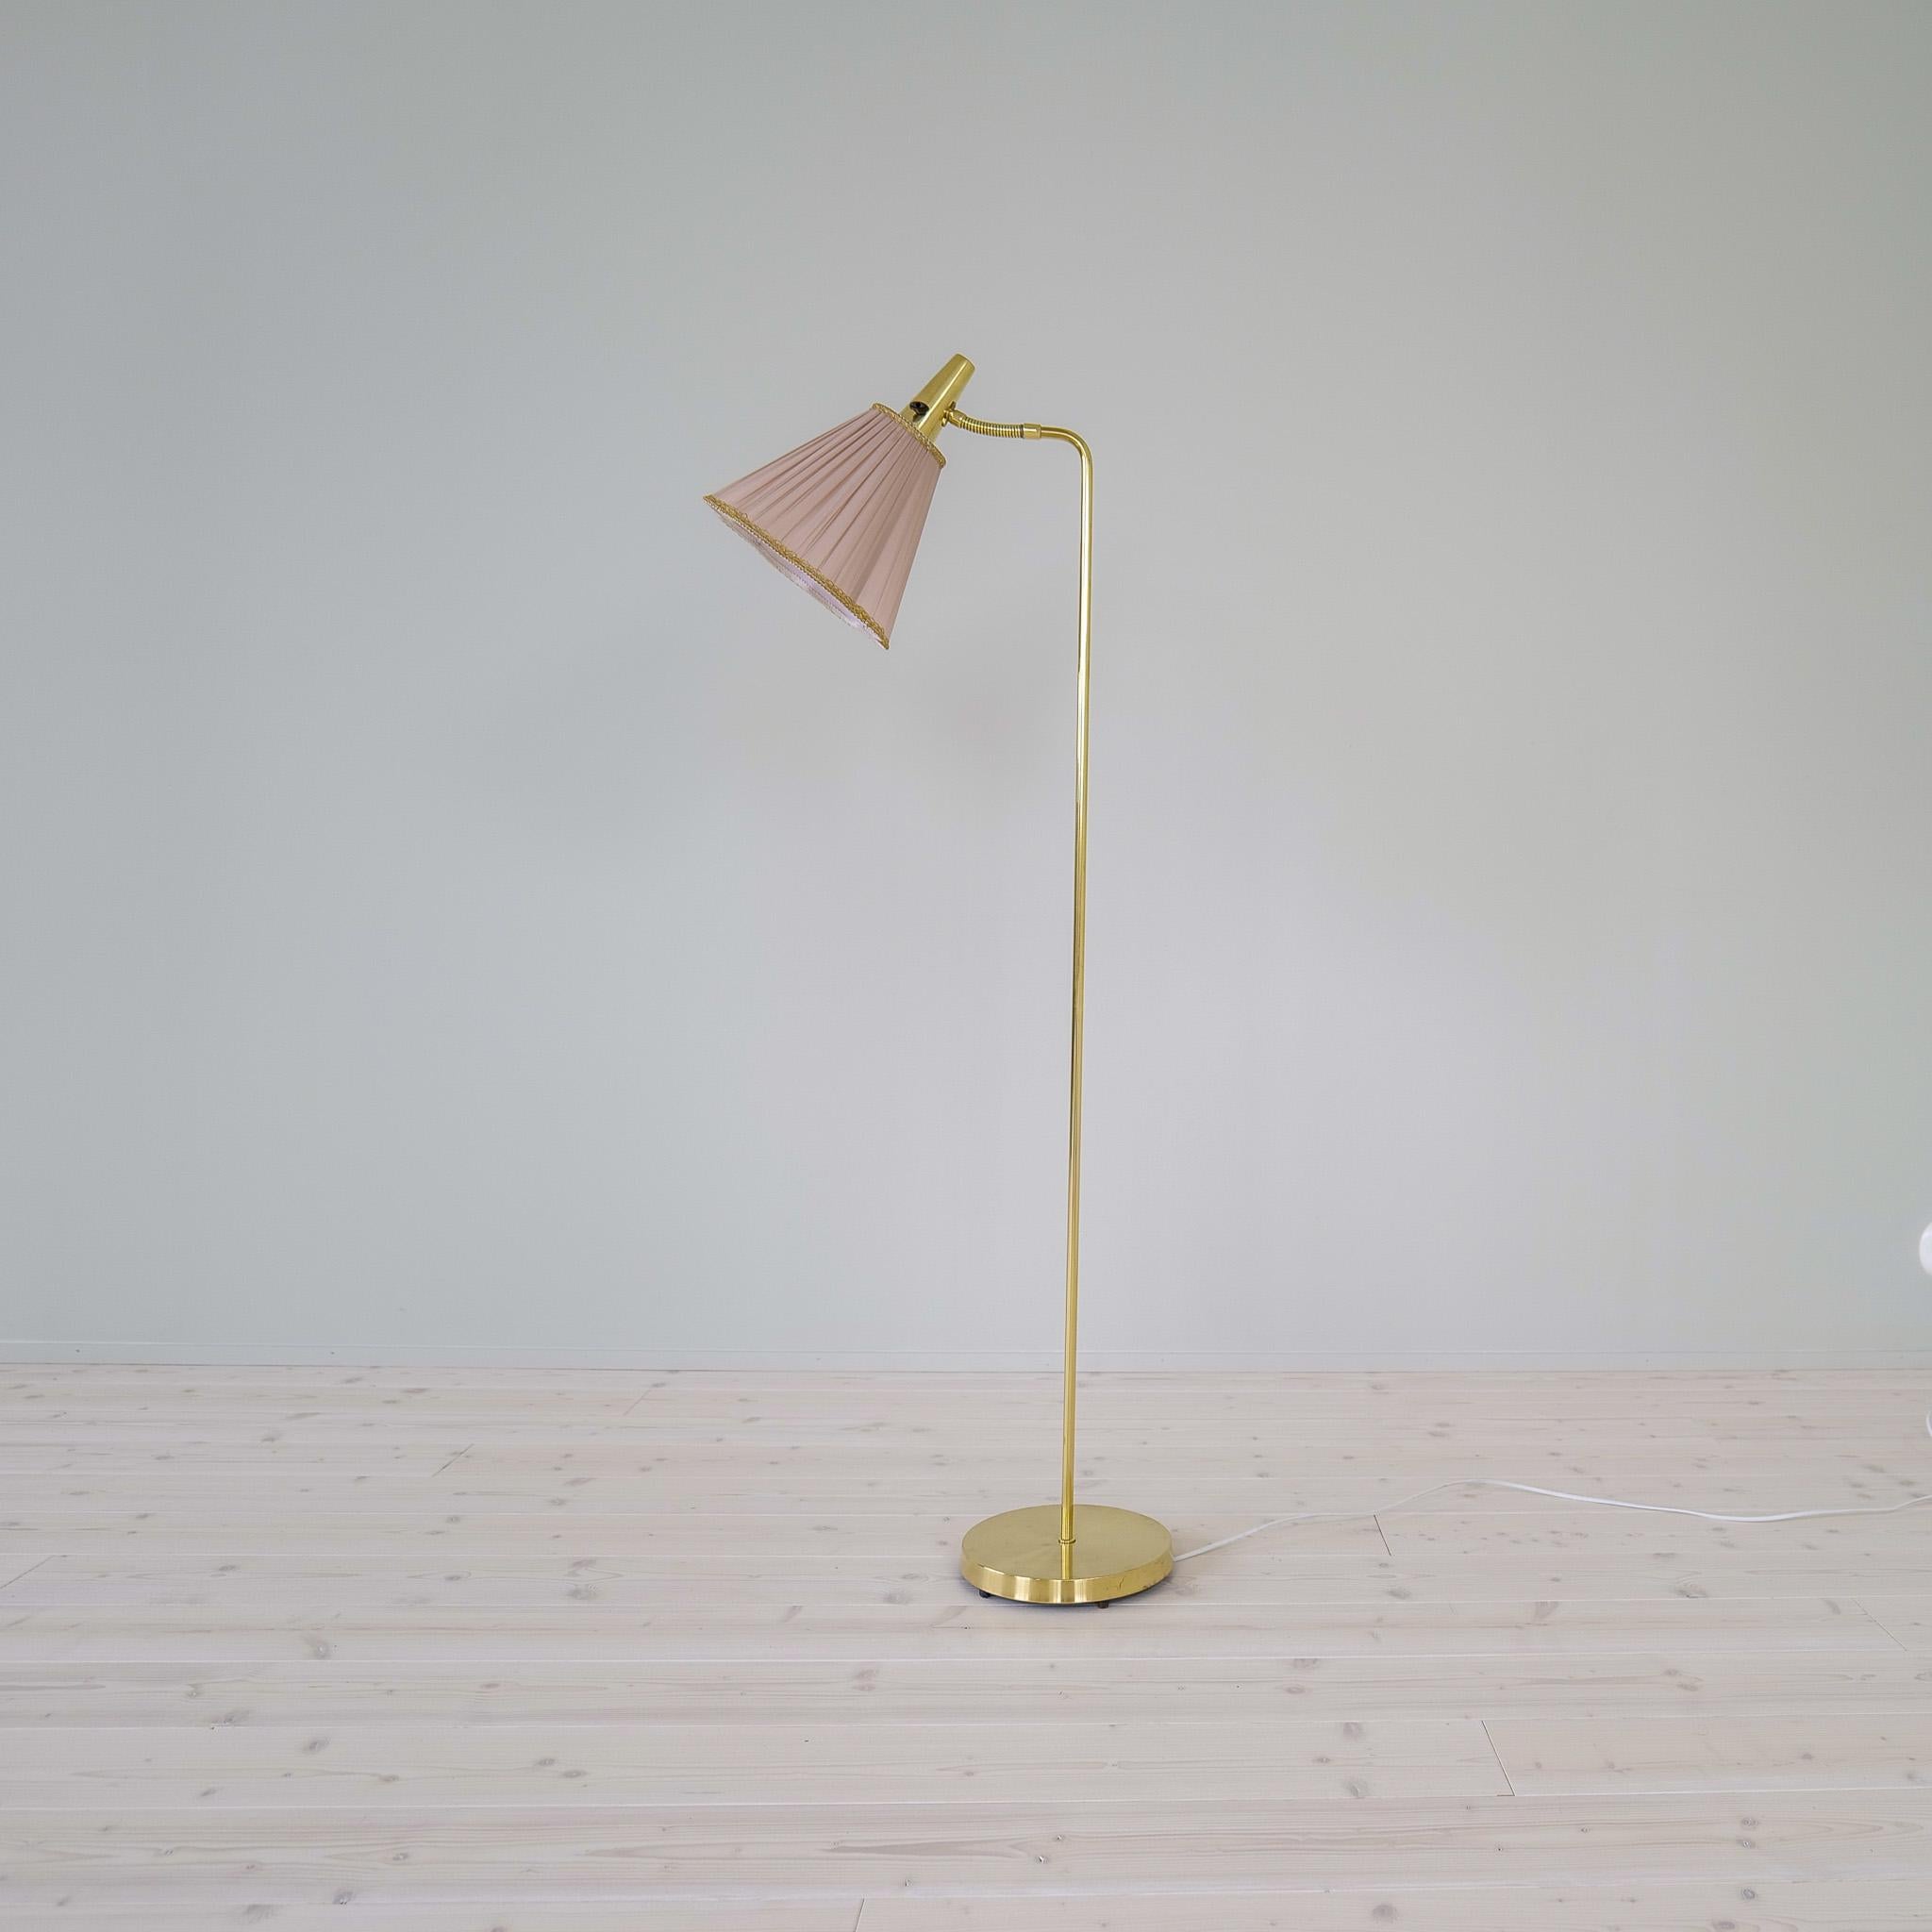 This lamp produced at Falkenbergs Belysning in Sweden during the 1960s. Made in brass with a base in cast iron. The shade with its mellow pink color works good with the brass. 

Good working condition with some dents on the foot and scratches on